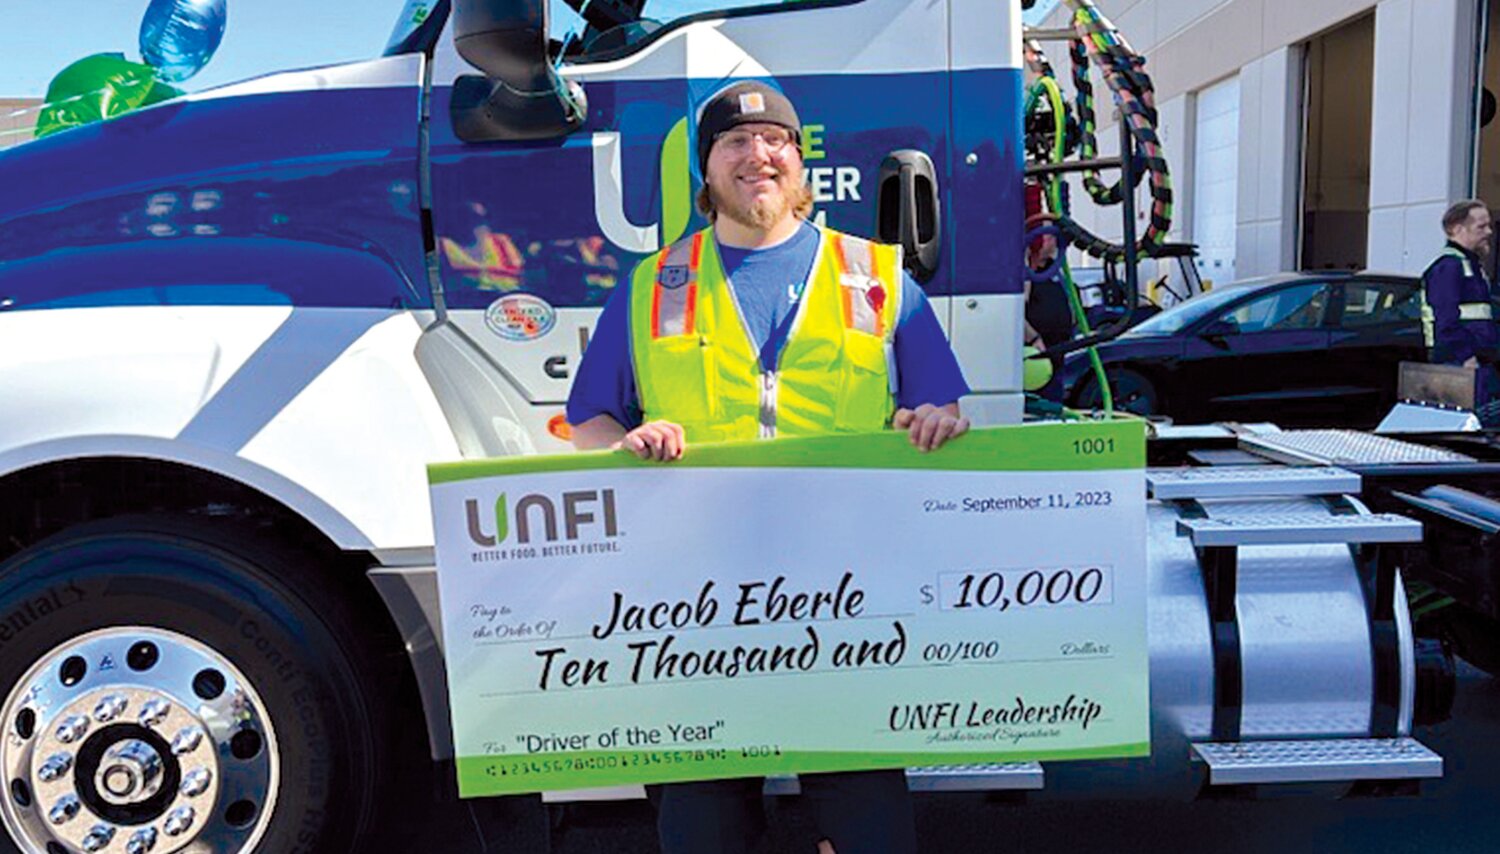 Jacob Eberle was one of four United Natural Foods associates selected as a 2023 Elite Driver of the Year as part of the company’s Driver Ambassador Program. This photo of Eberle and a check for $10,000 was provided by the company.